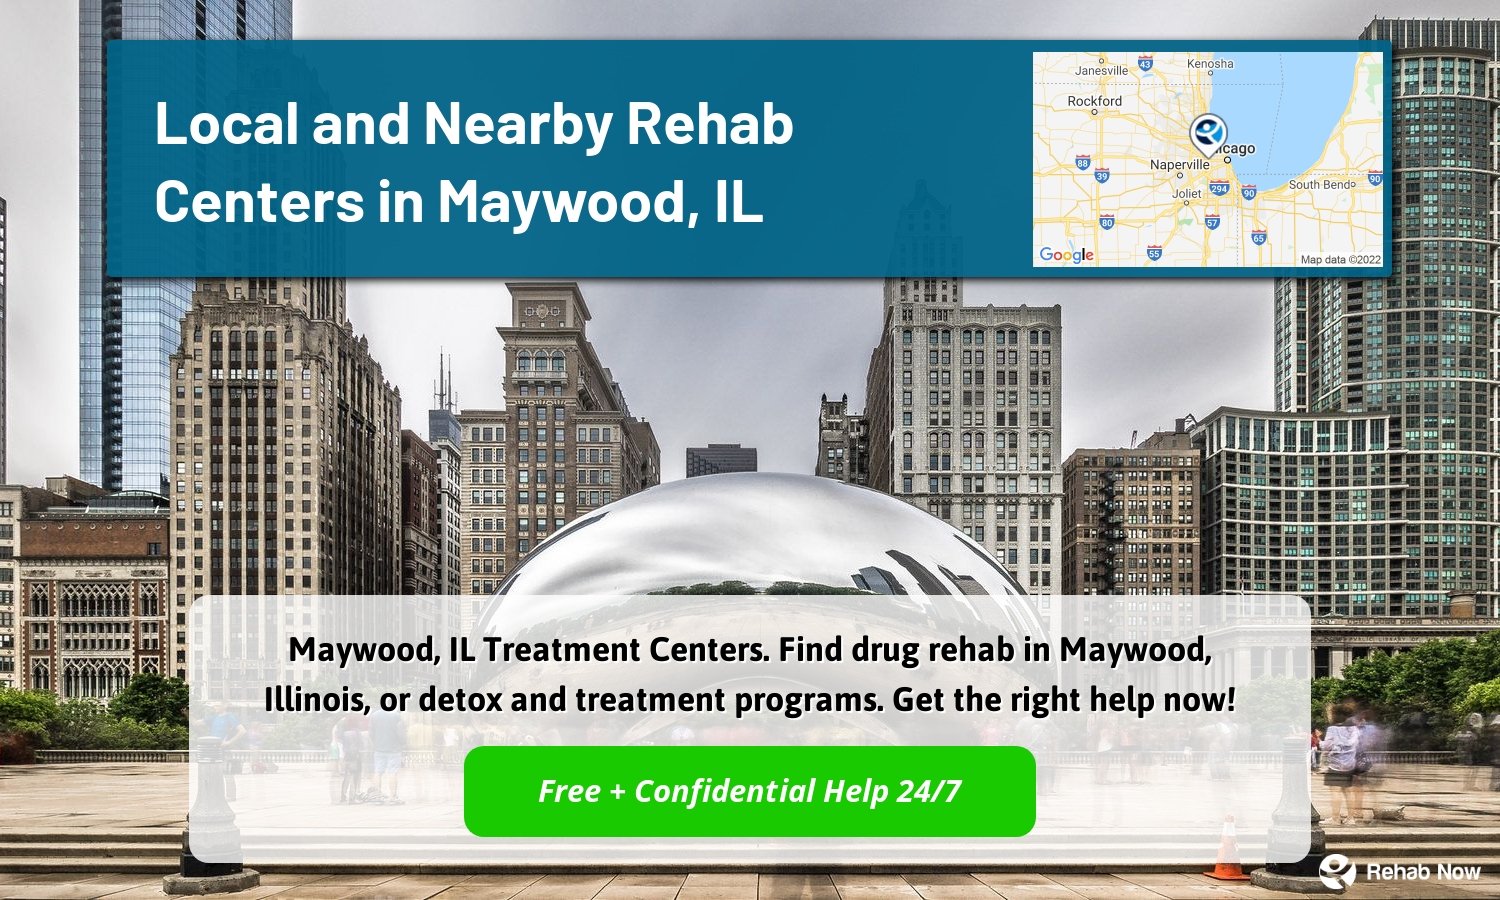 Maywood, IL Treatment Centers. Find drug rehab in Maywood, Illinois, or detox and treatment programs. Get the right help now!